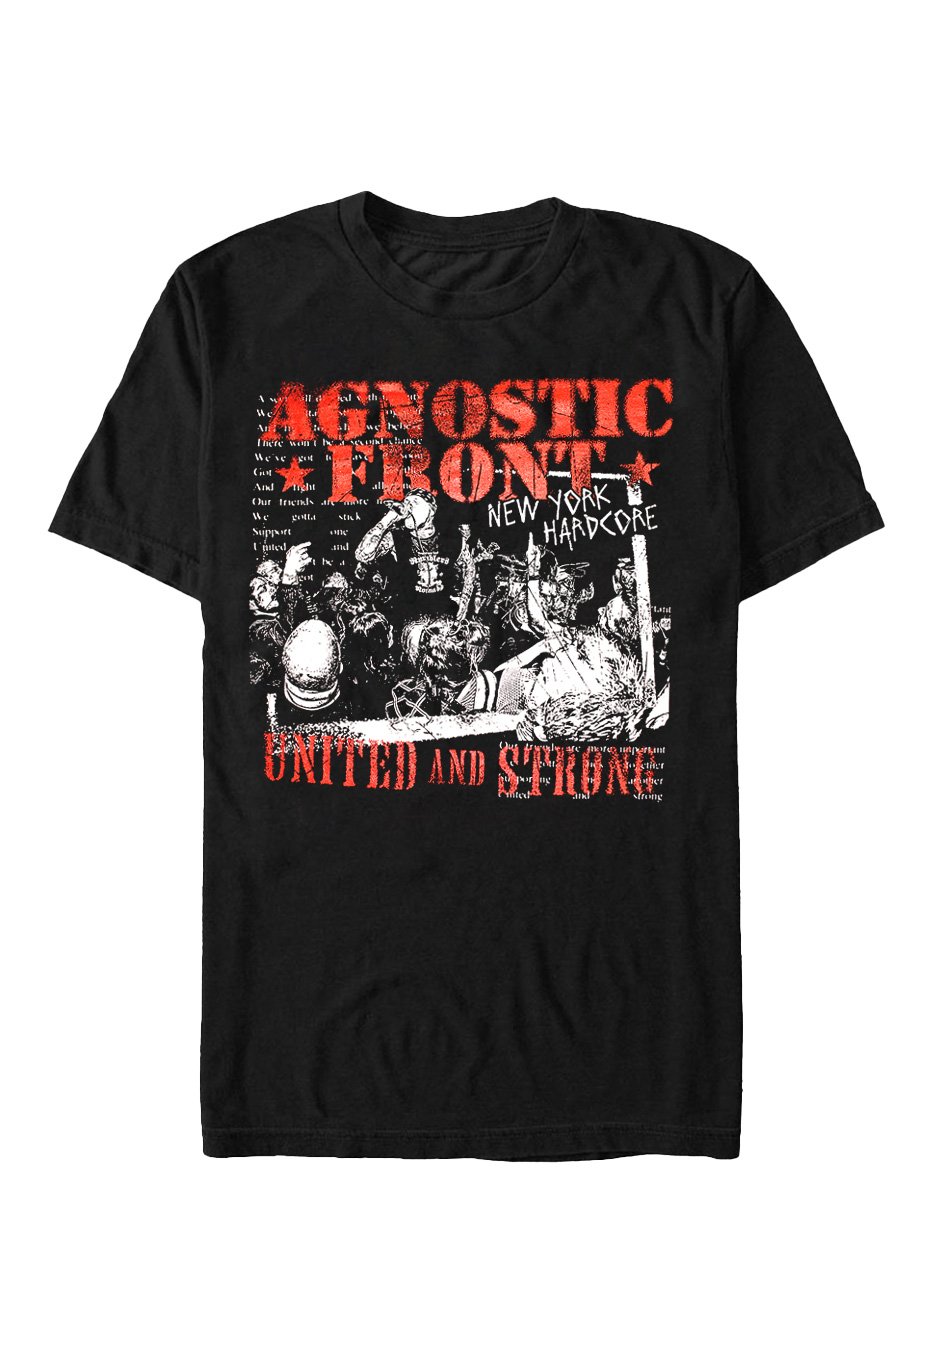 Agnostic Front - United And Strong - T-Shirt